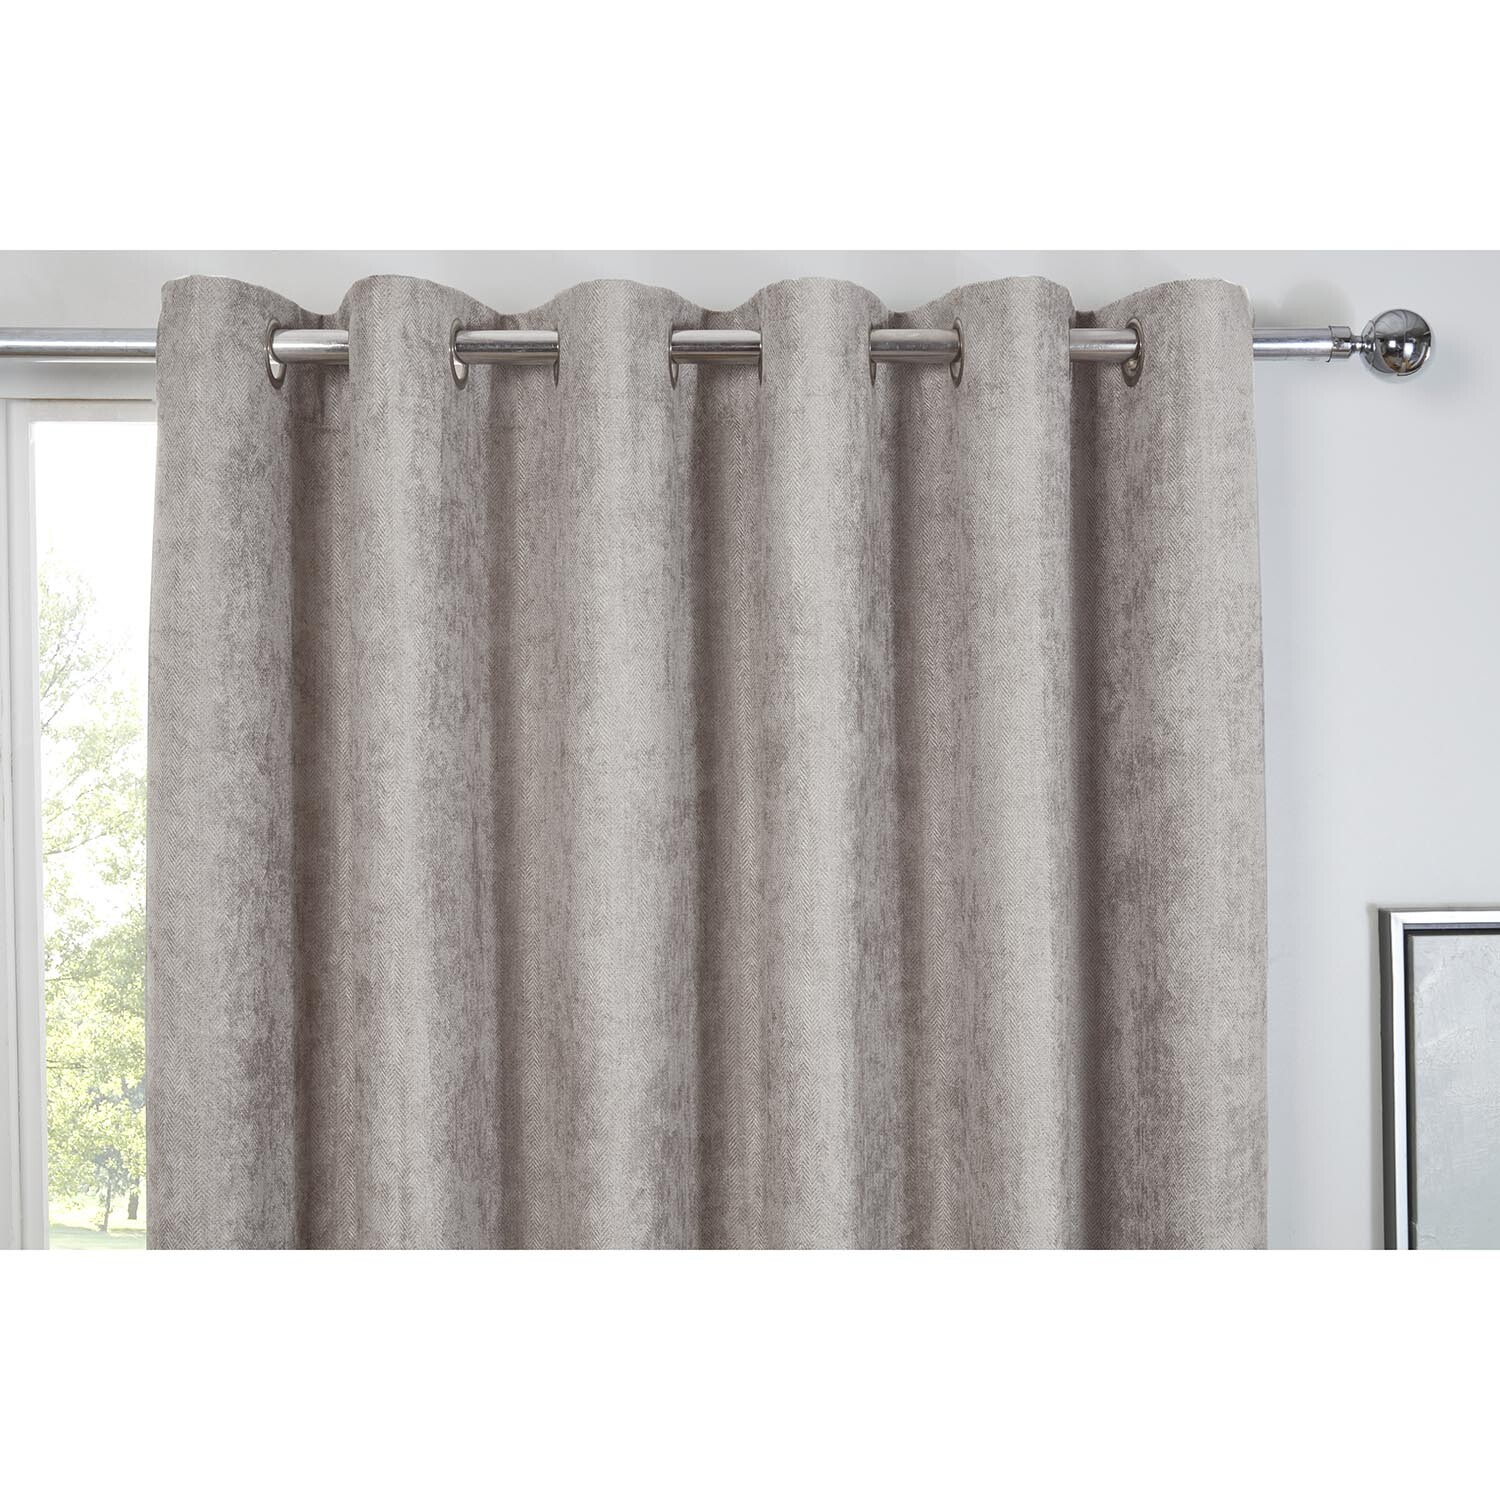 Alden Thermal Curtains - Dove Grey / 229cm Image 2